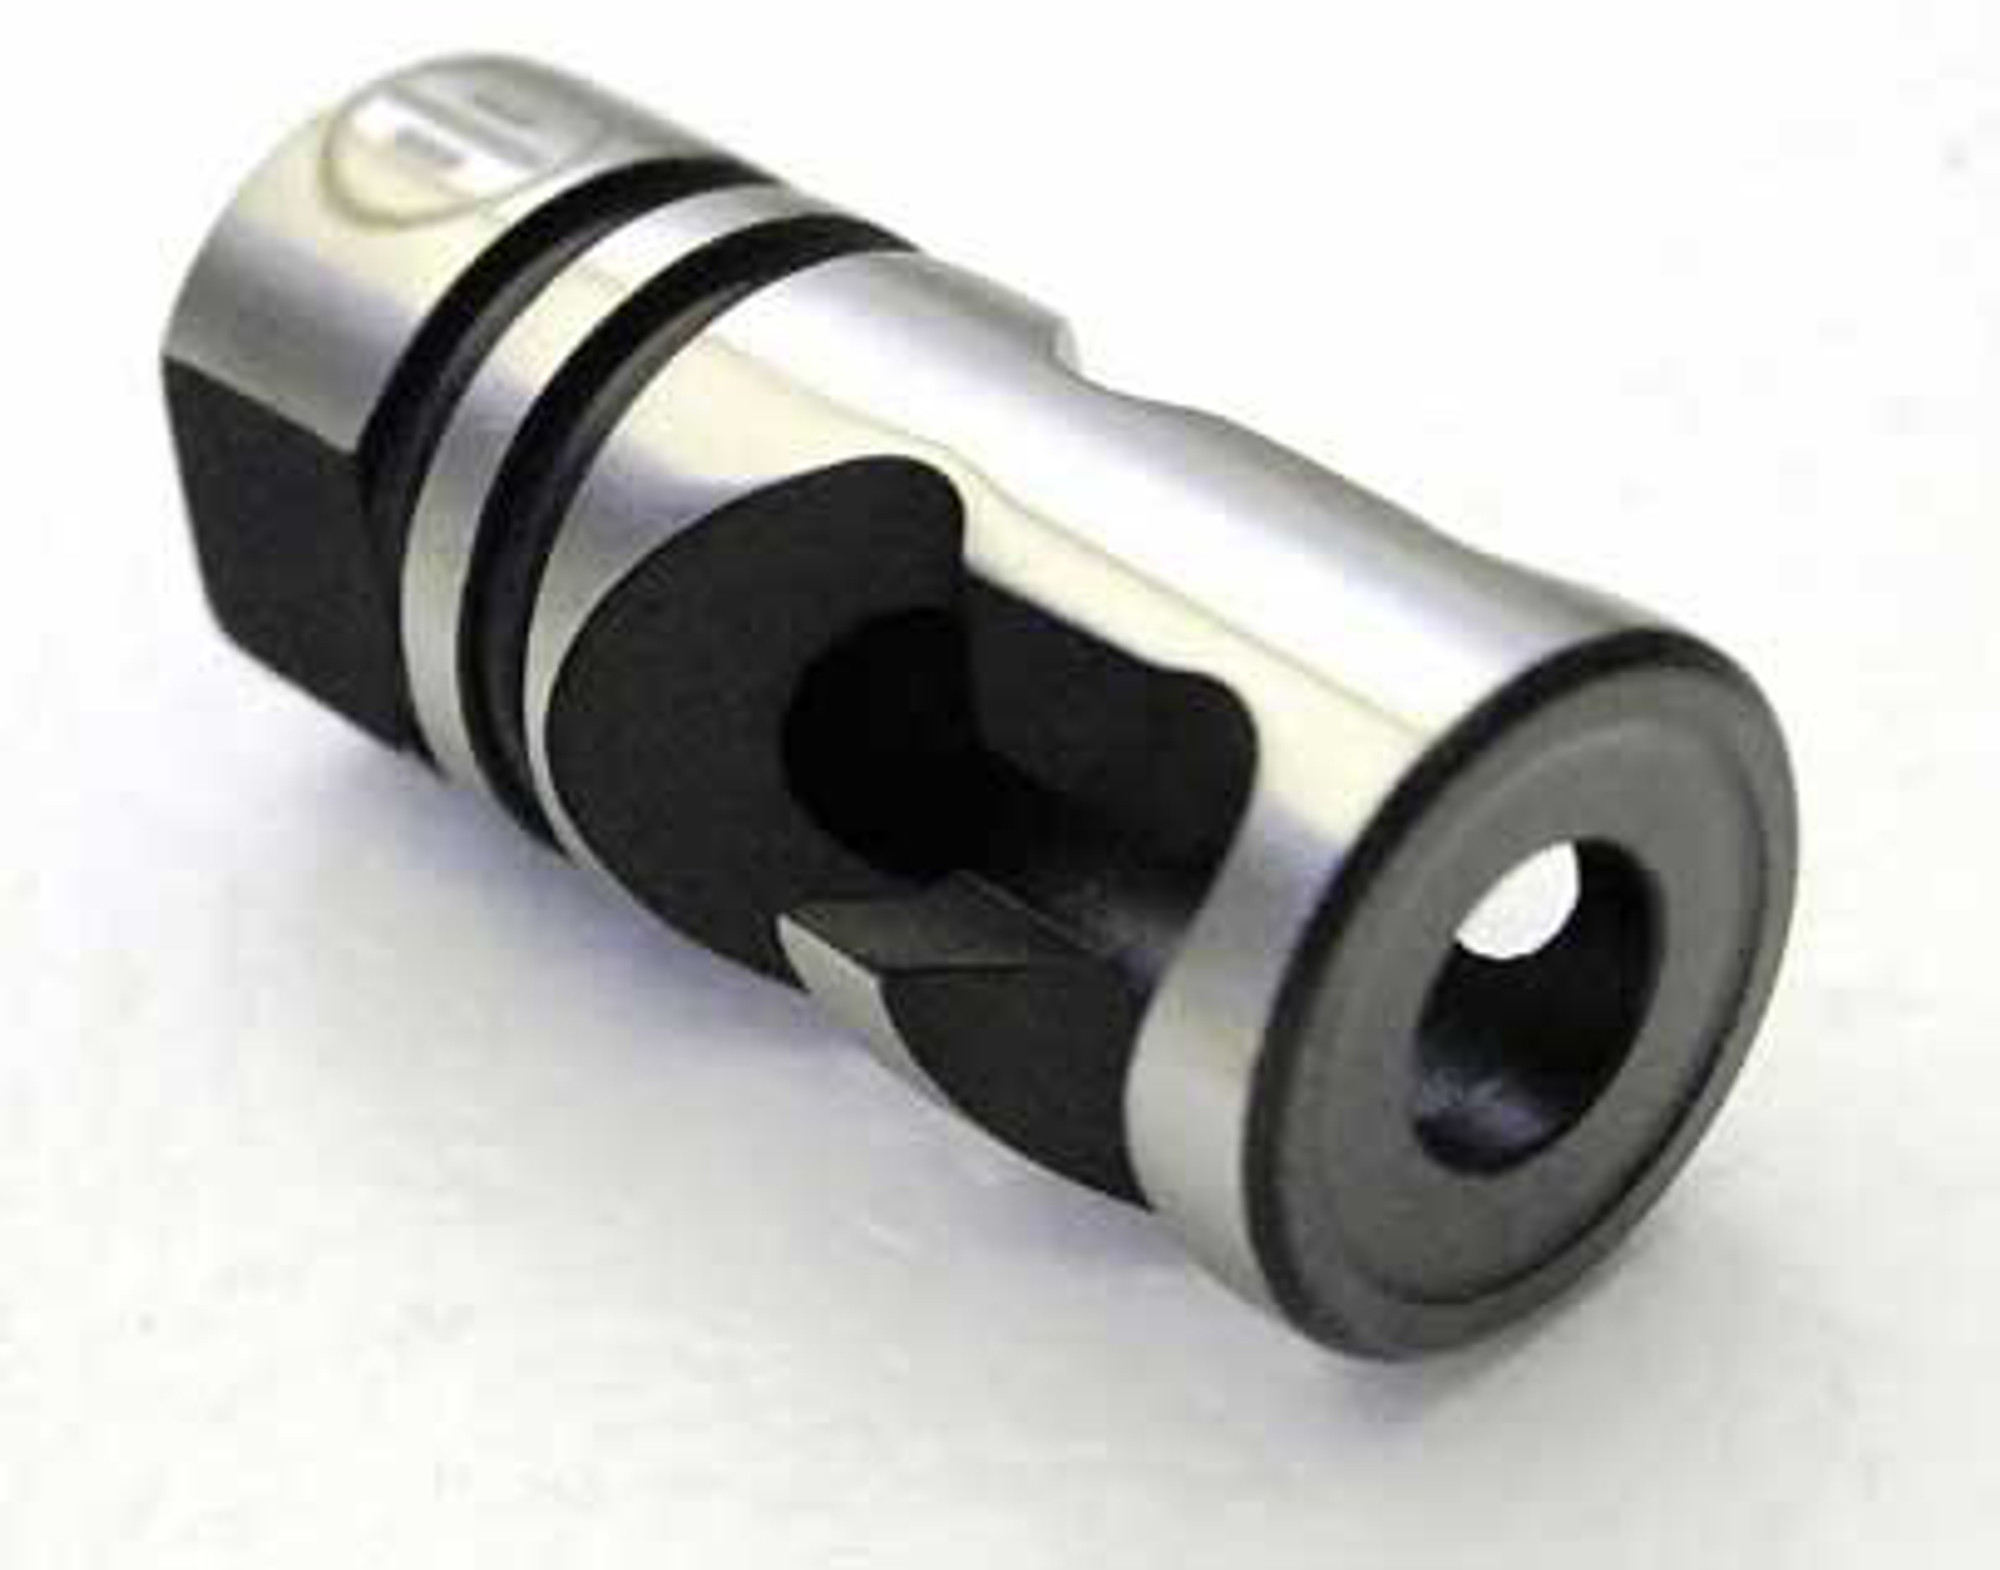 Mad Bull DNTC Compensator Two Tone 14mm CCW Flashhider for A.E.G